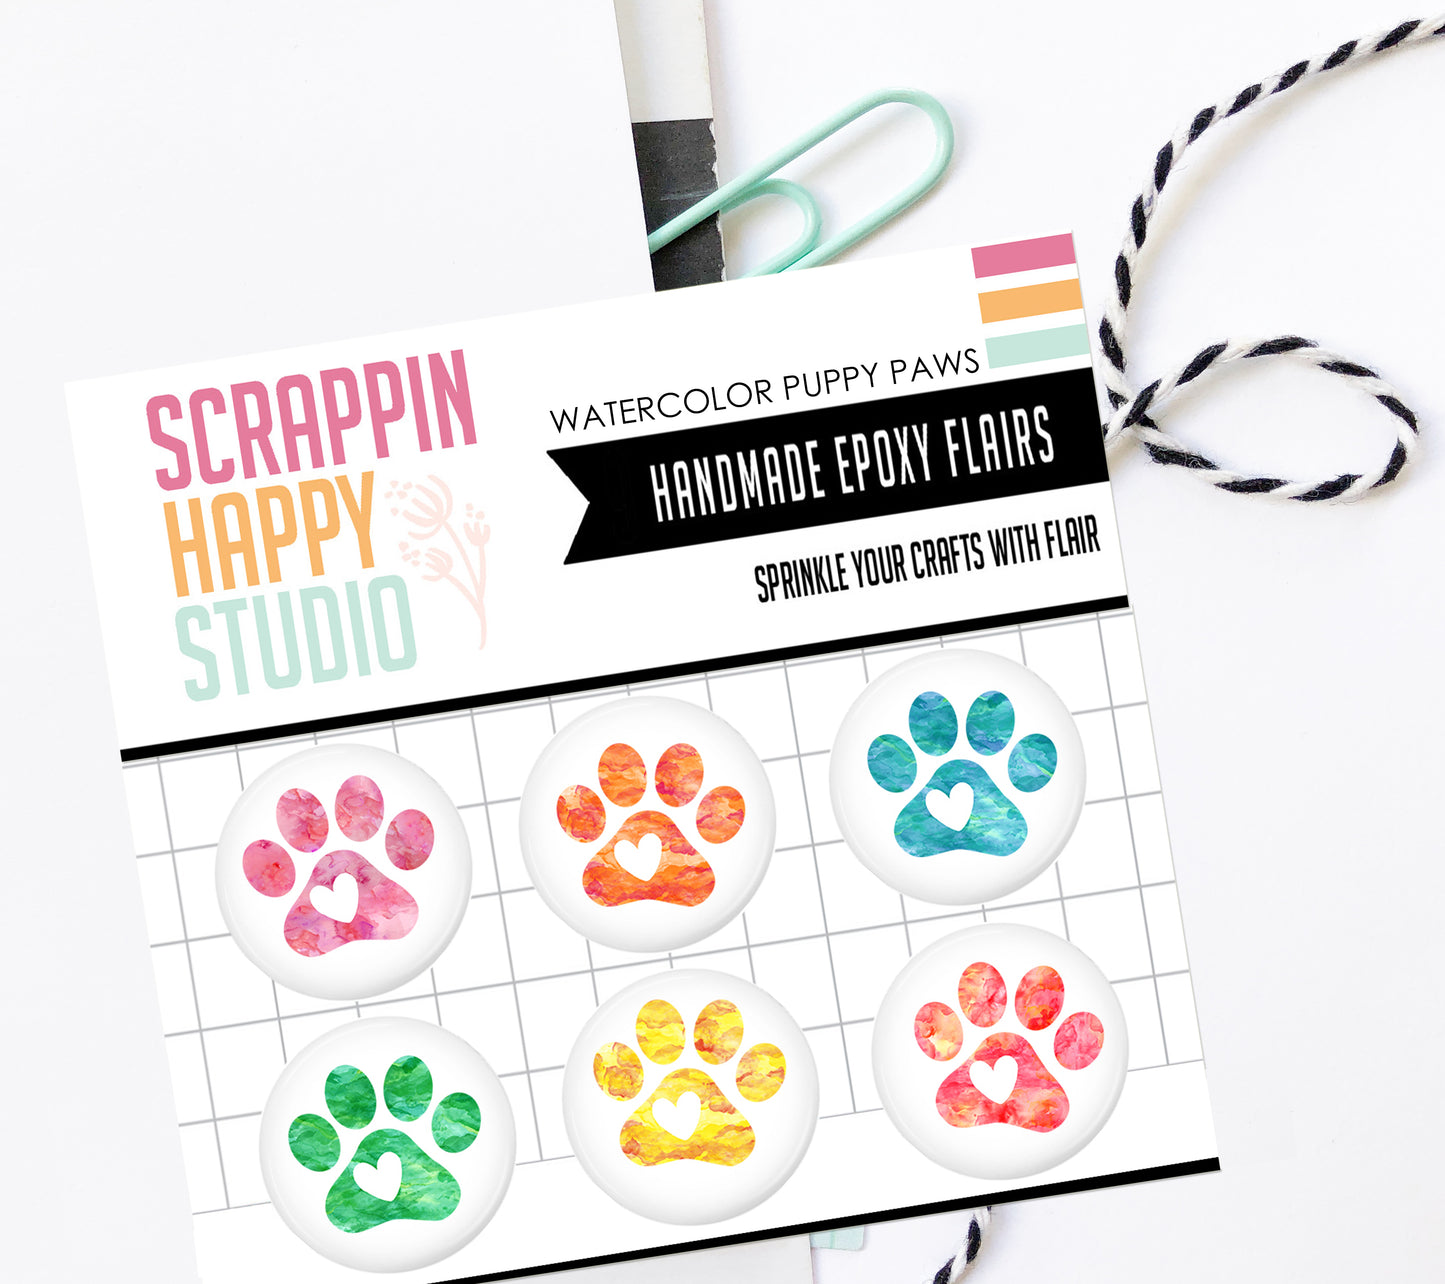 Watercolor Puppy Paws Epoxy Flair